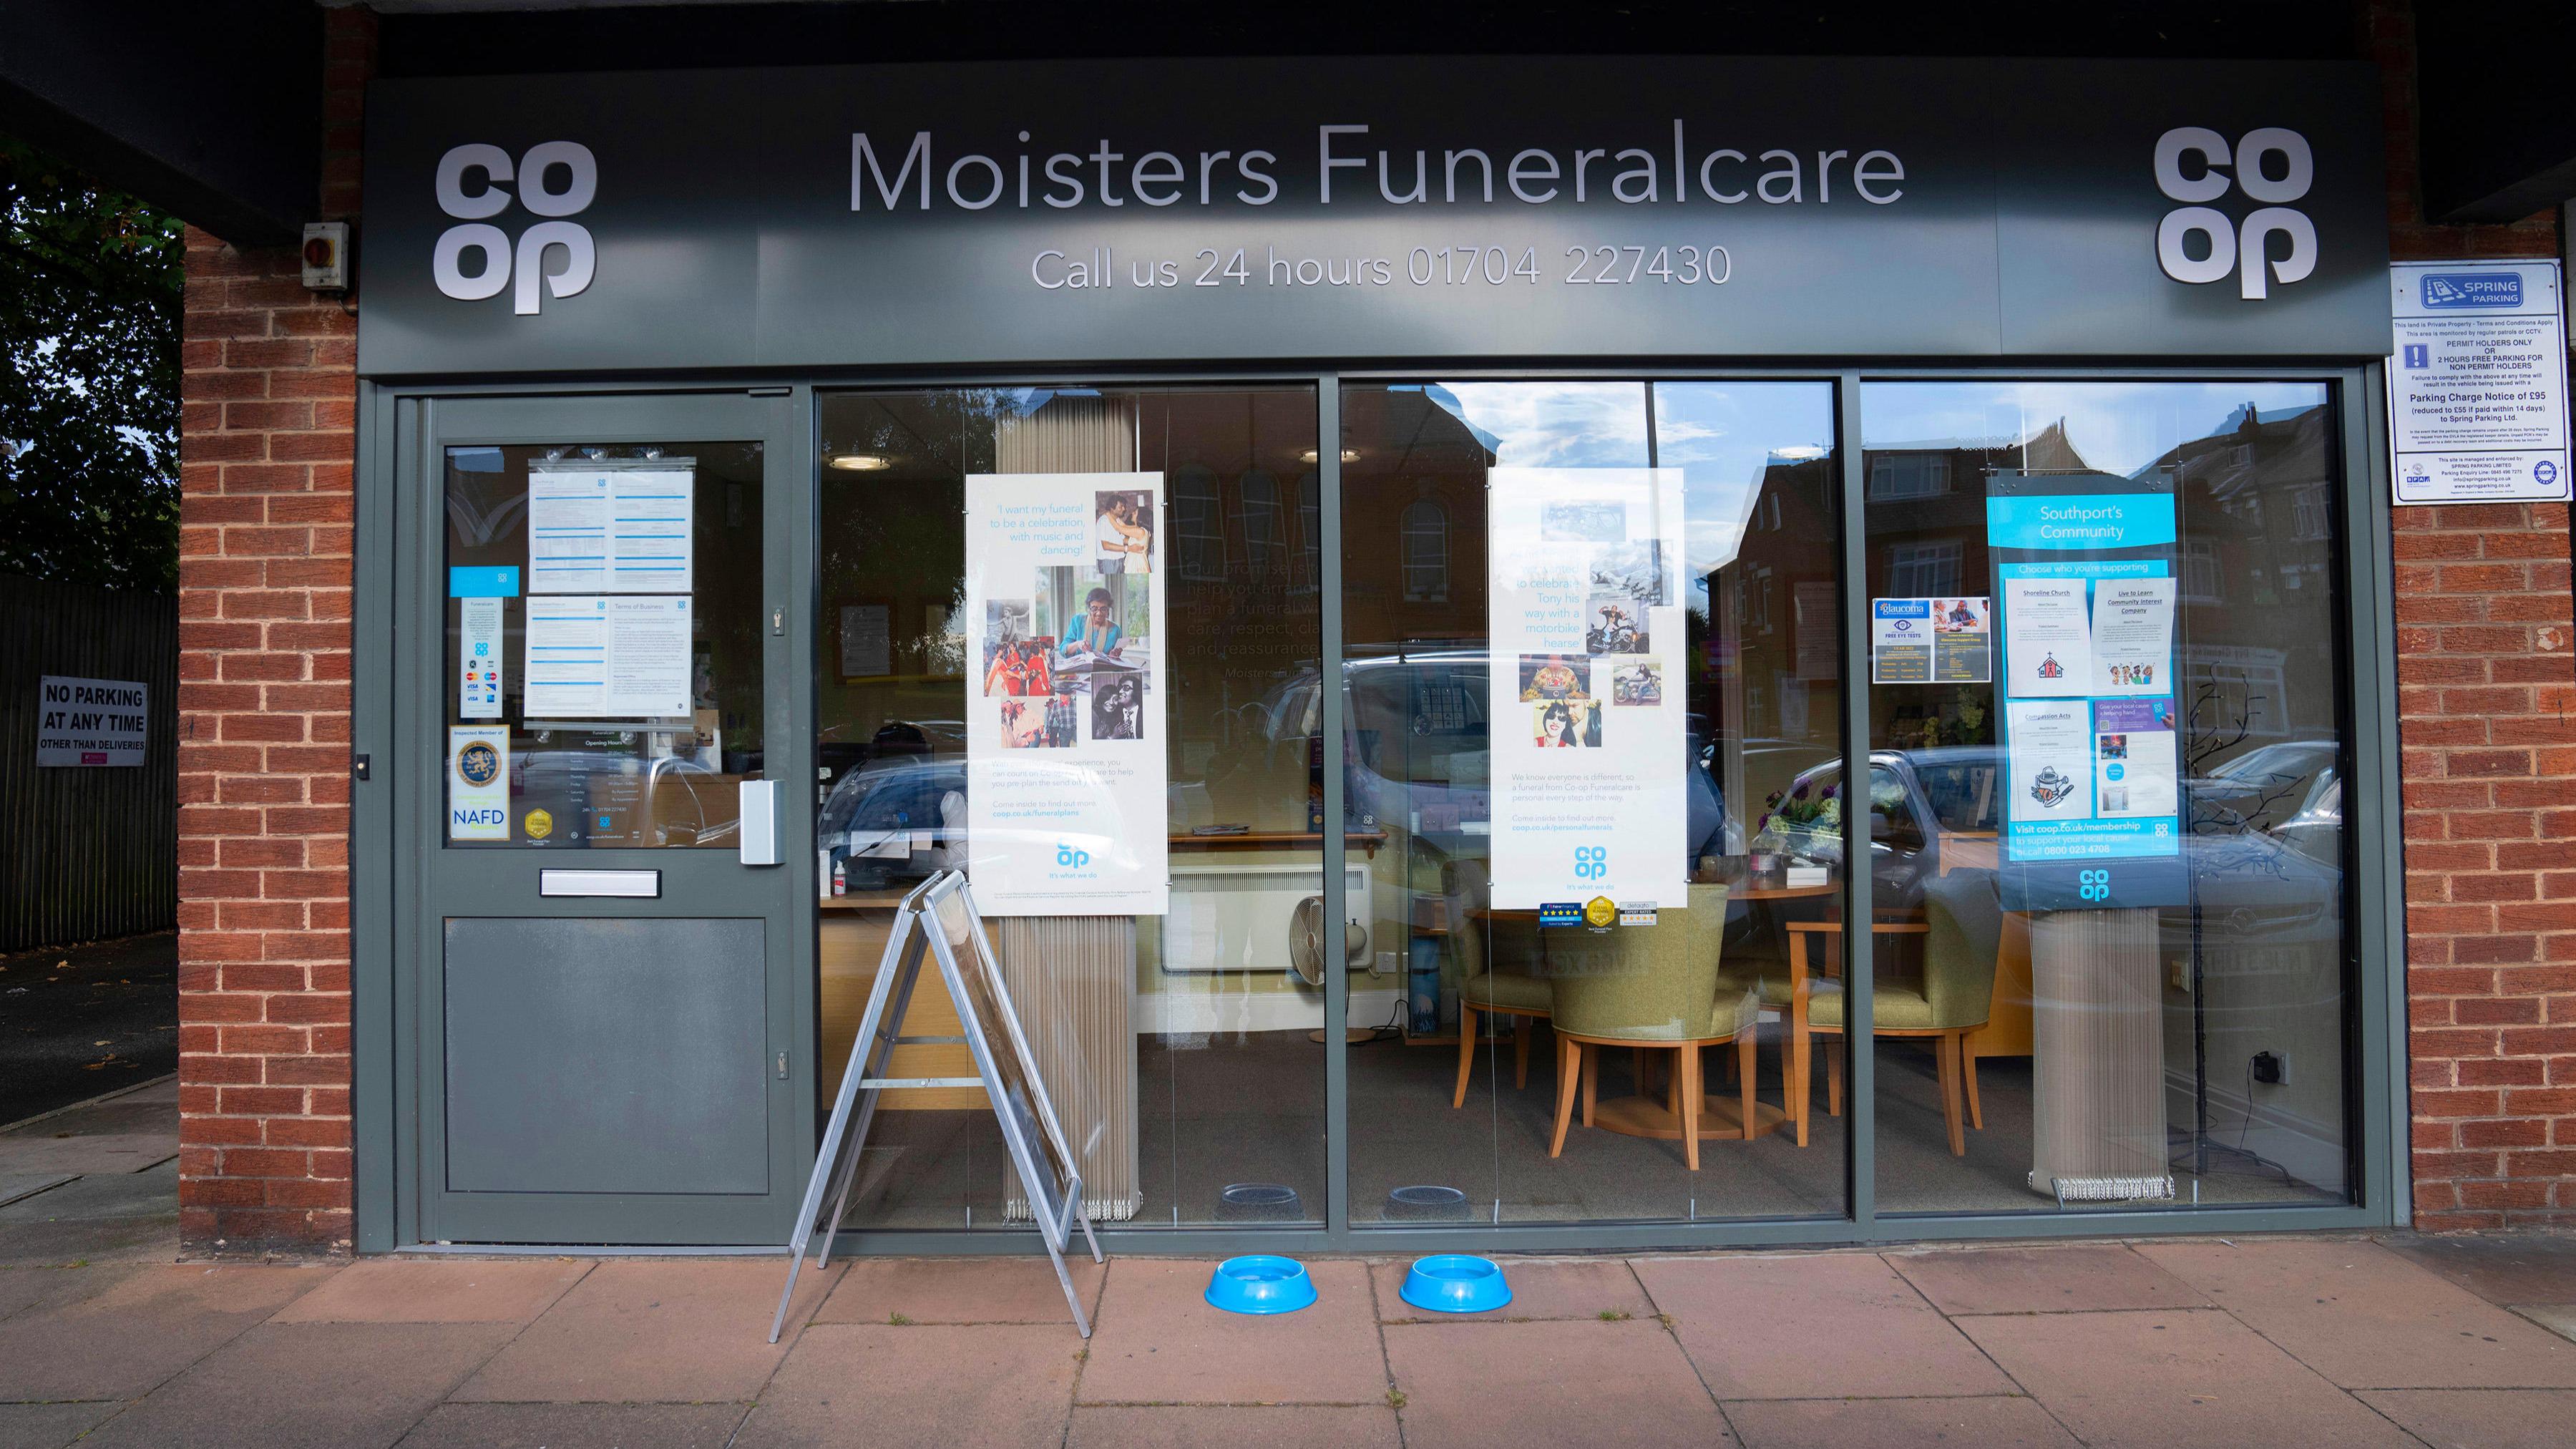 Images Moisters Funeralcare